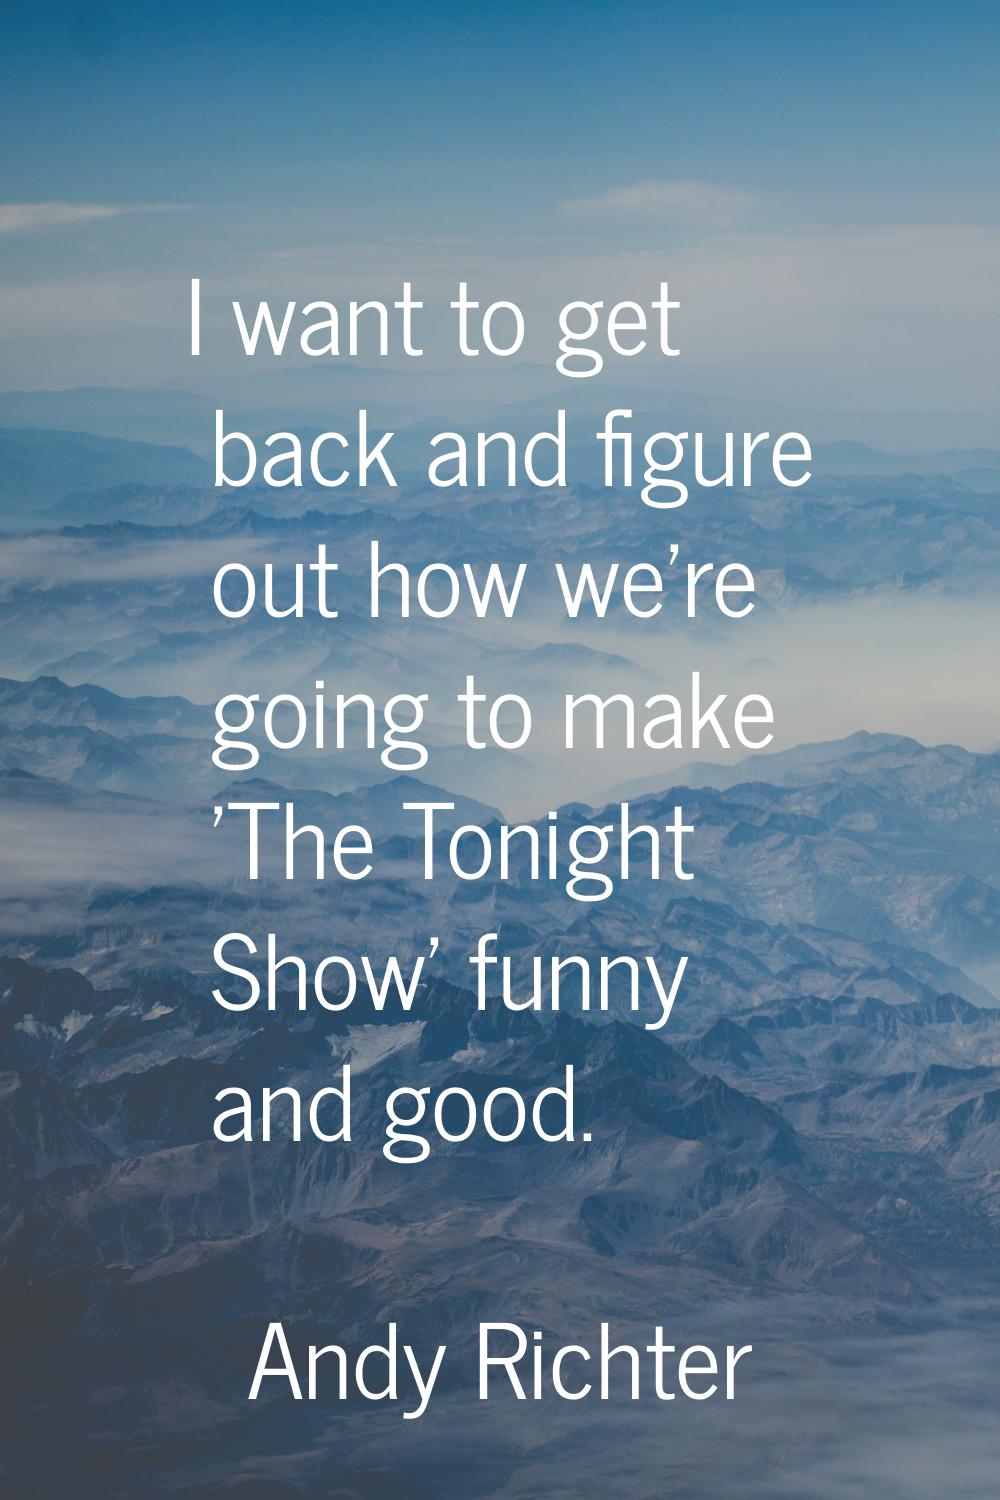 I want to get back and figure out how we're going to make 'The Tonight Show' funny and good.